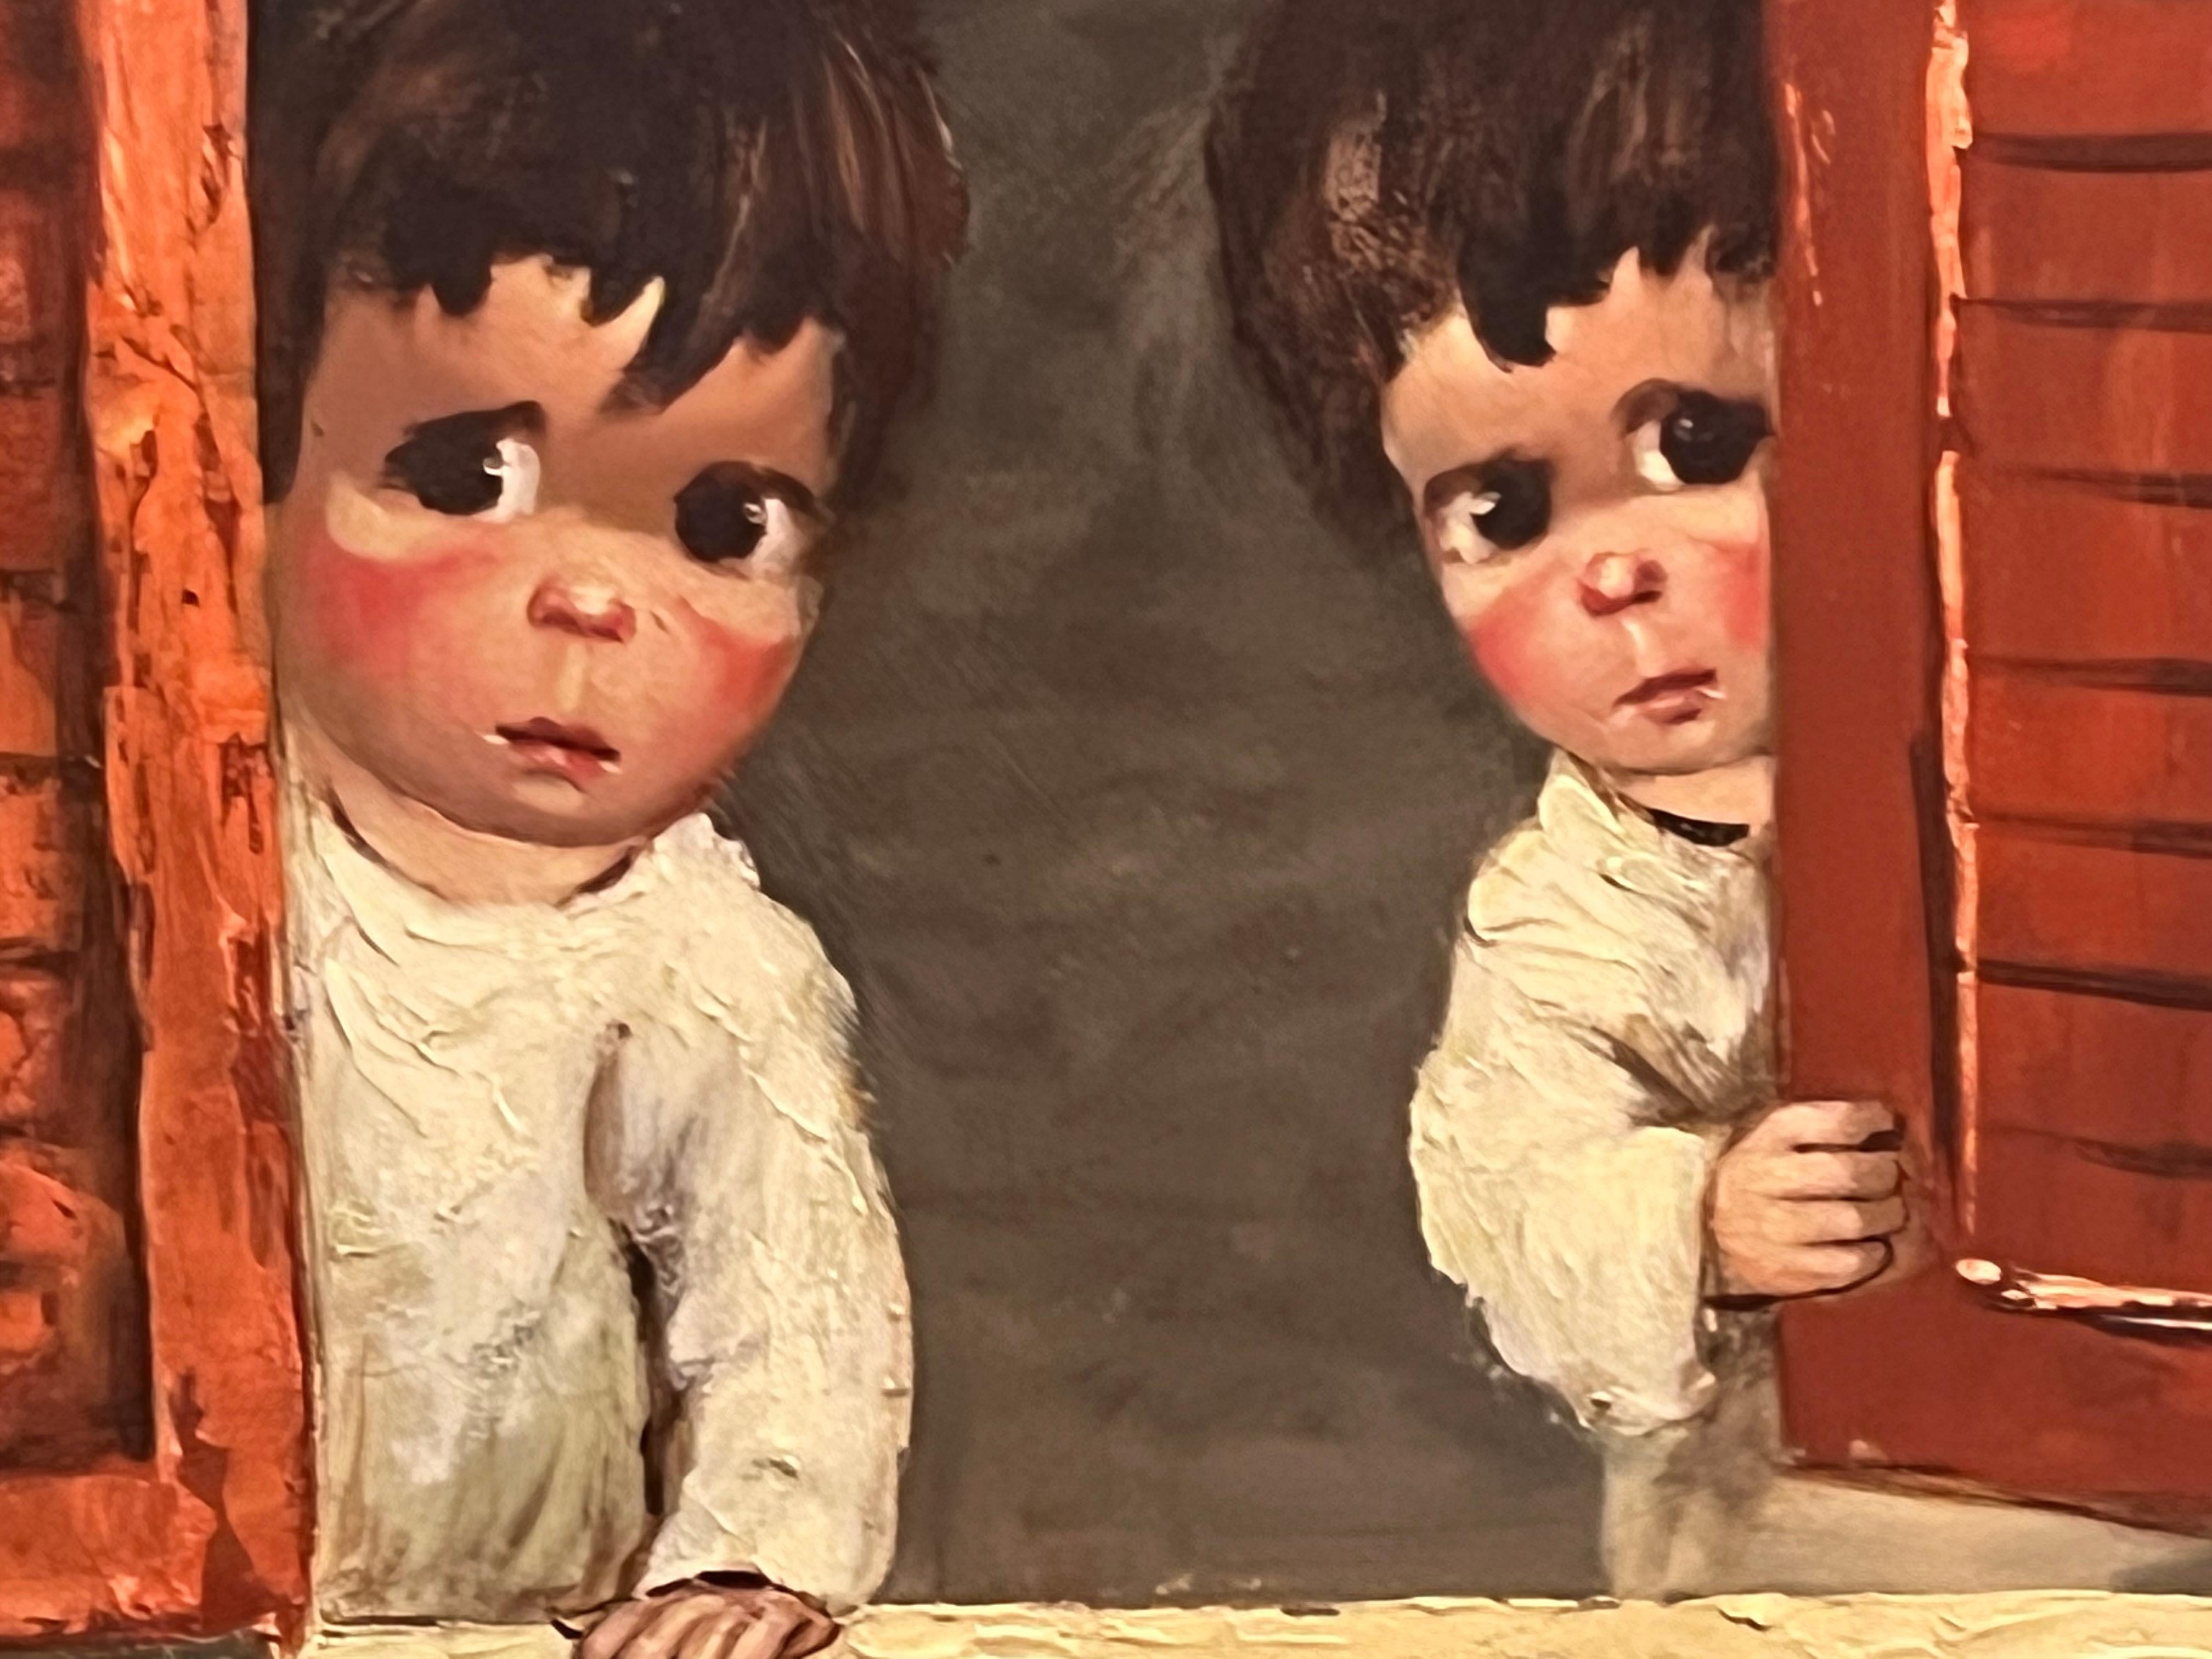 This painting features two children with big brown eyes peeking behind red-slatted shutters. The innocence on their faces contrasts with some sense of embarrassment, like if they had done something naughty they wanted to hide.

Harold Stephenson,